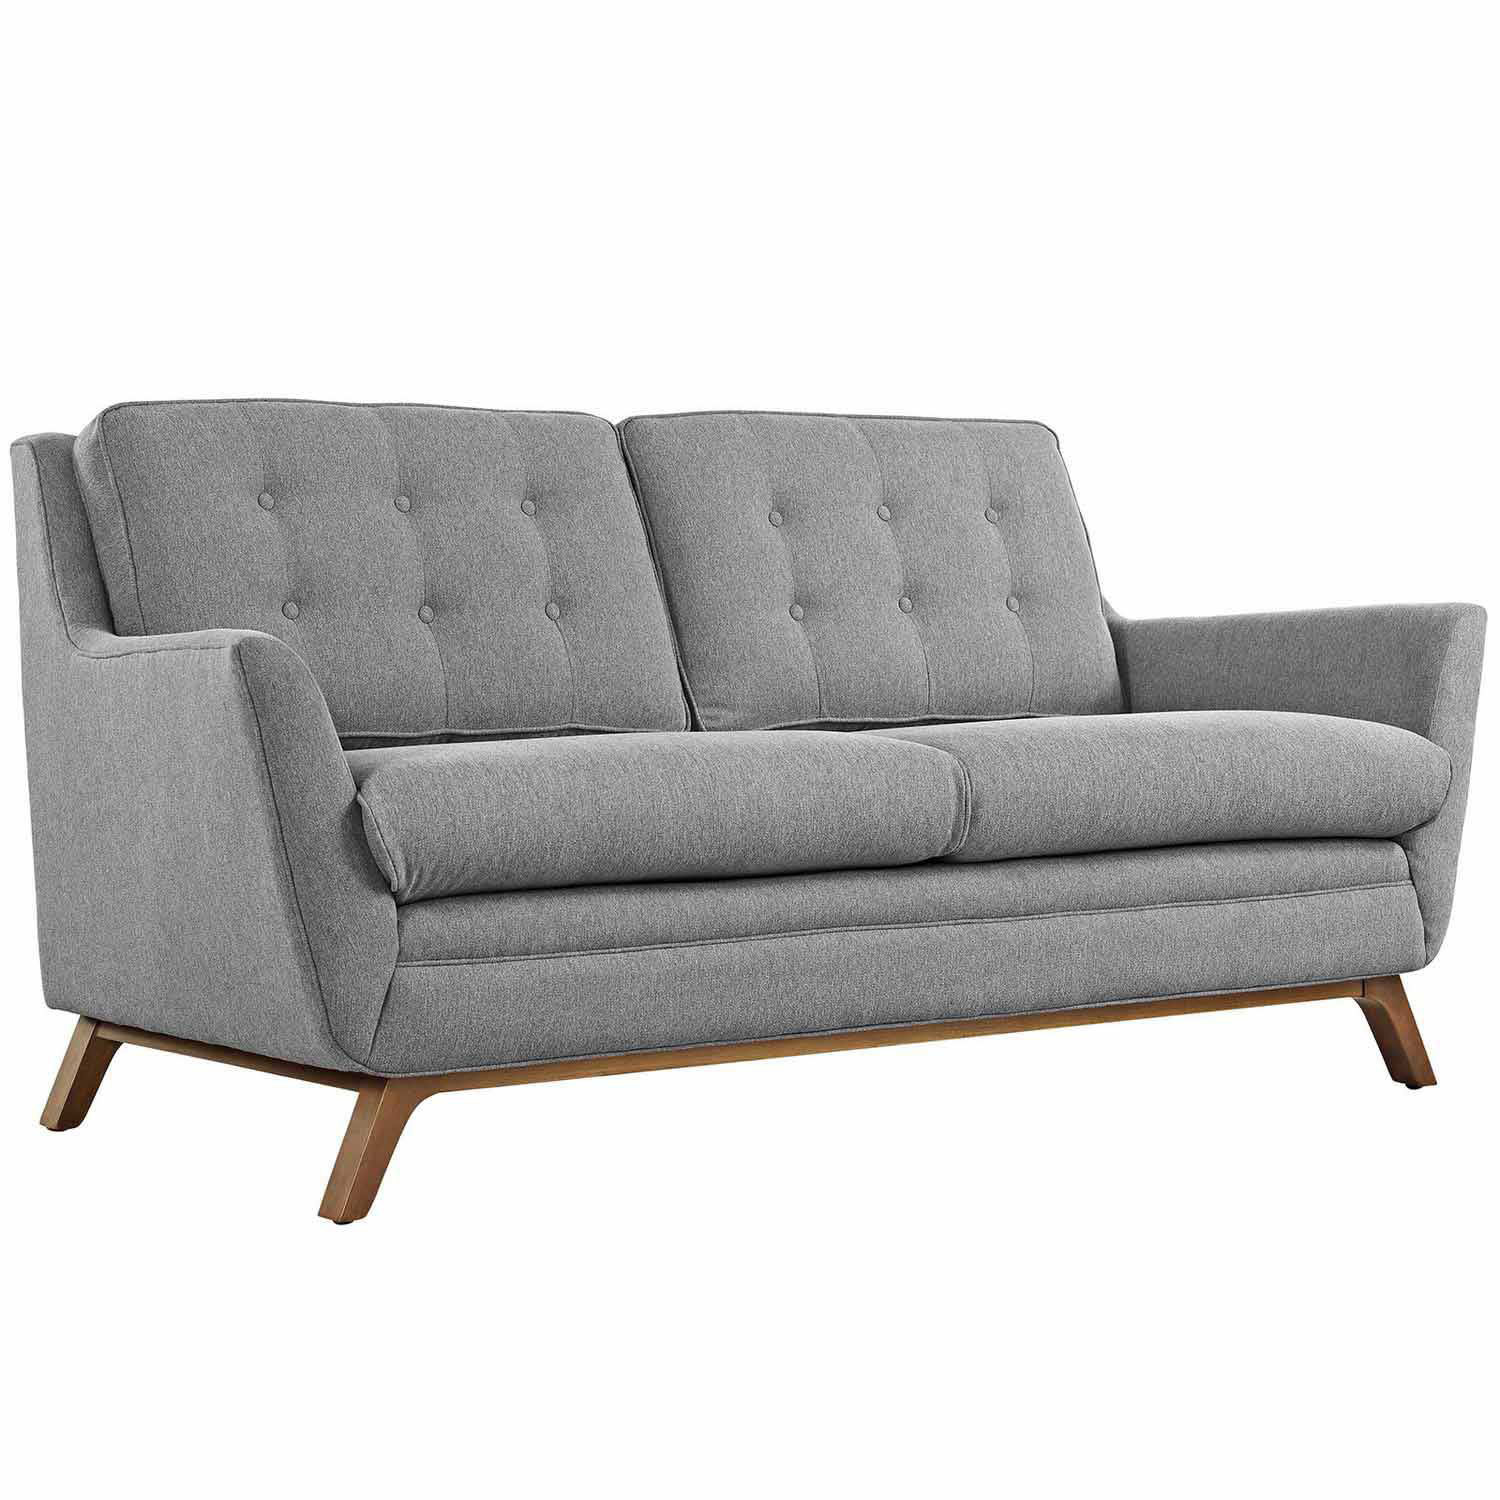 Modway Beguile Fabric Loveseat - Expectation Gray